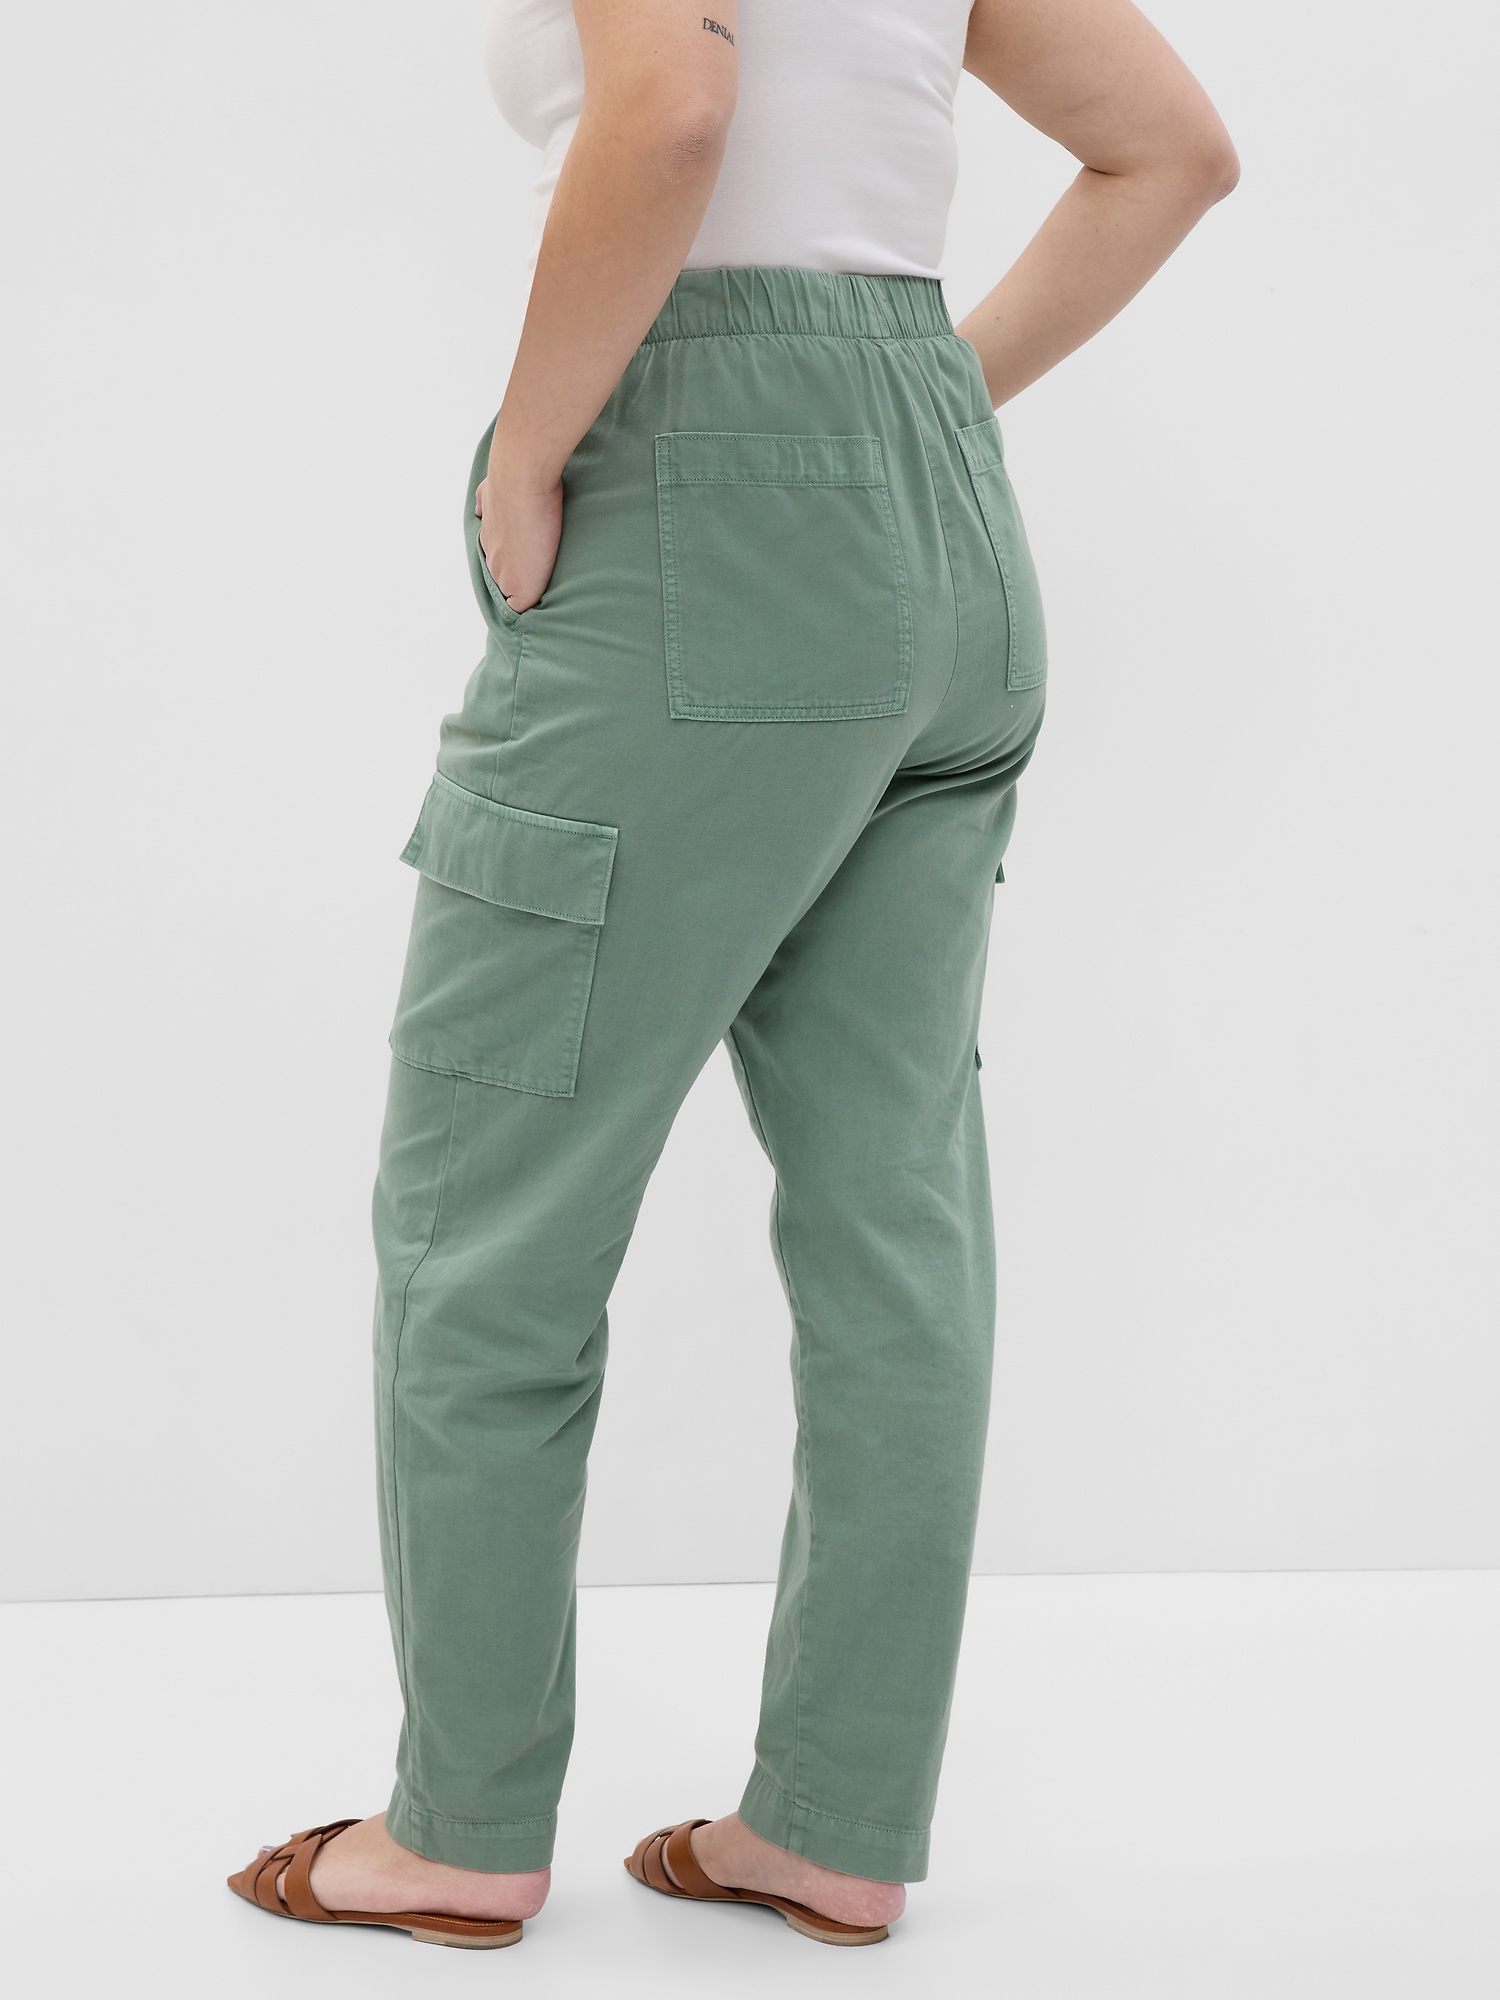 Gap Easy Straight Pull On Pants Sage Green Size Small Women's NEW